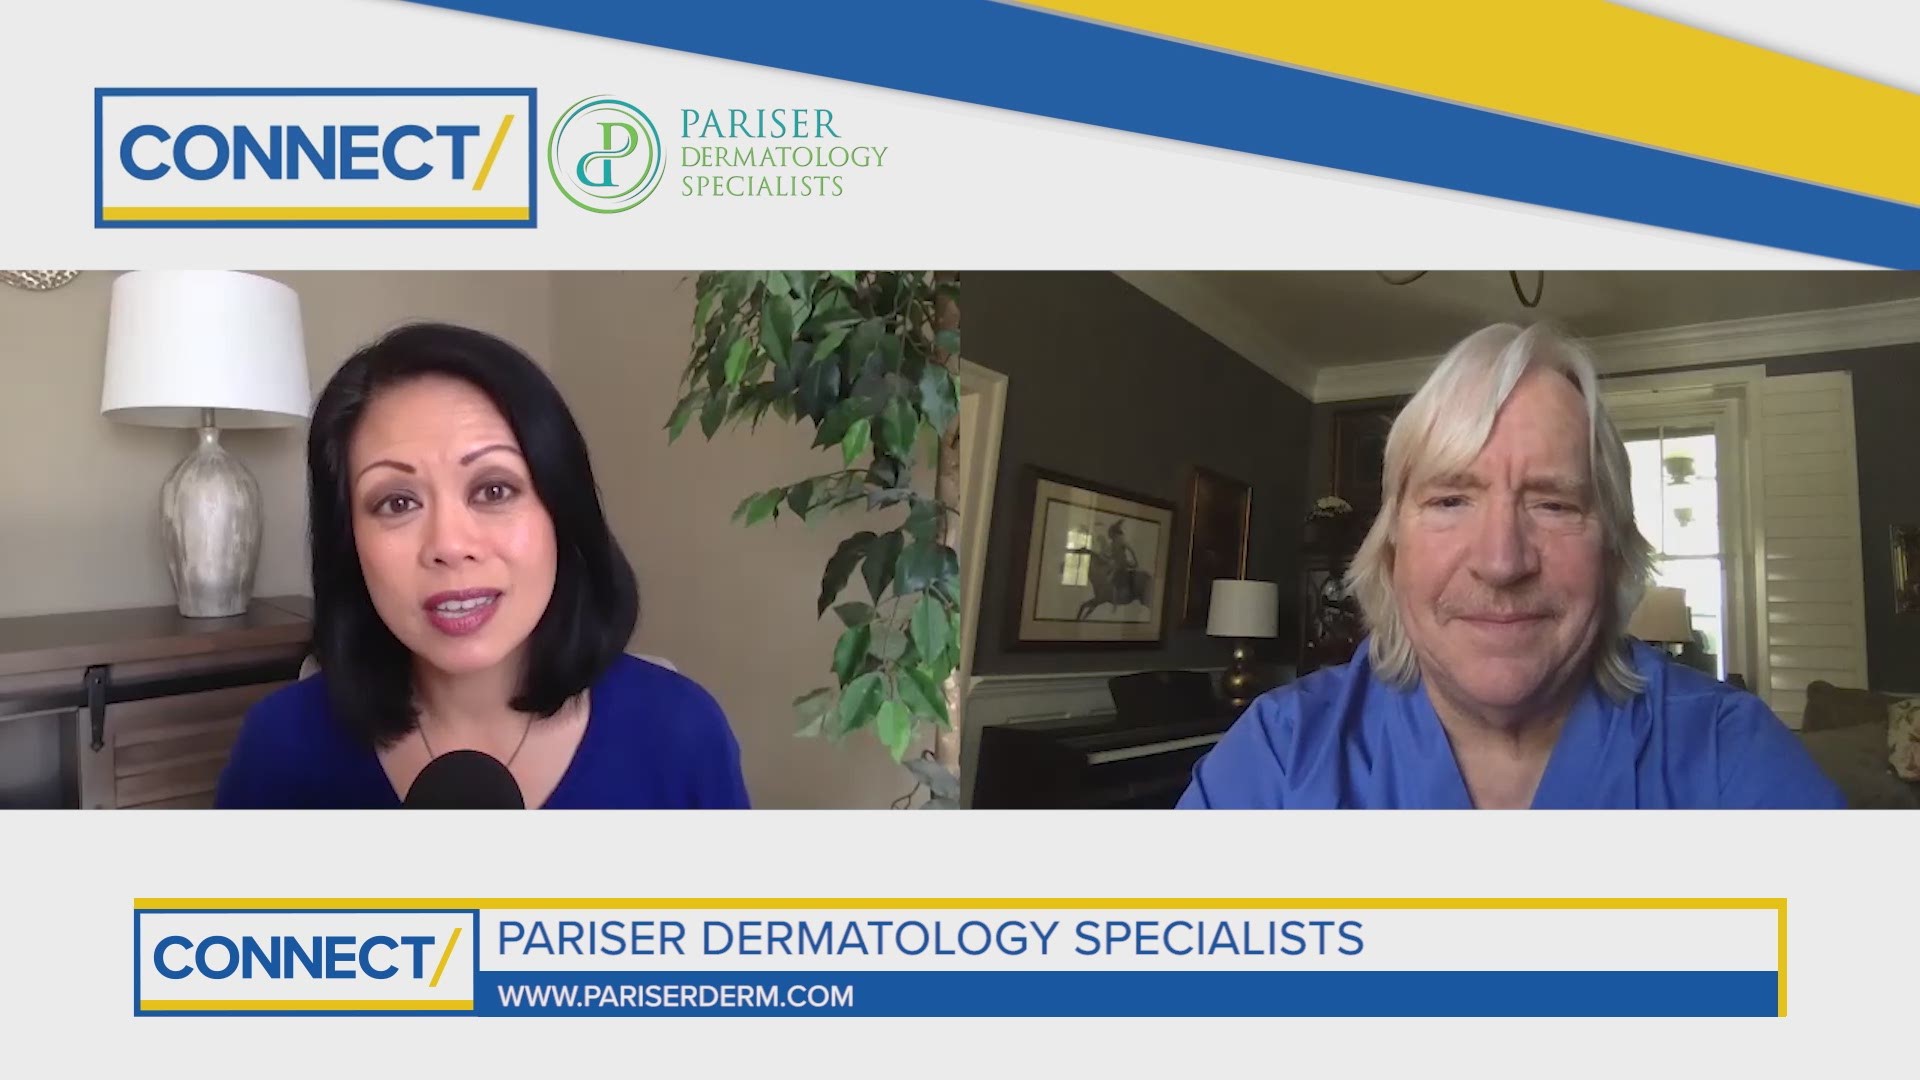 Dr. Robert Baer tells us how Pariser Dermatology is caring for patients in this time of social distancing.